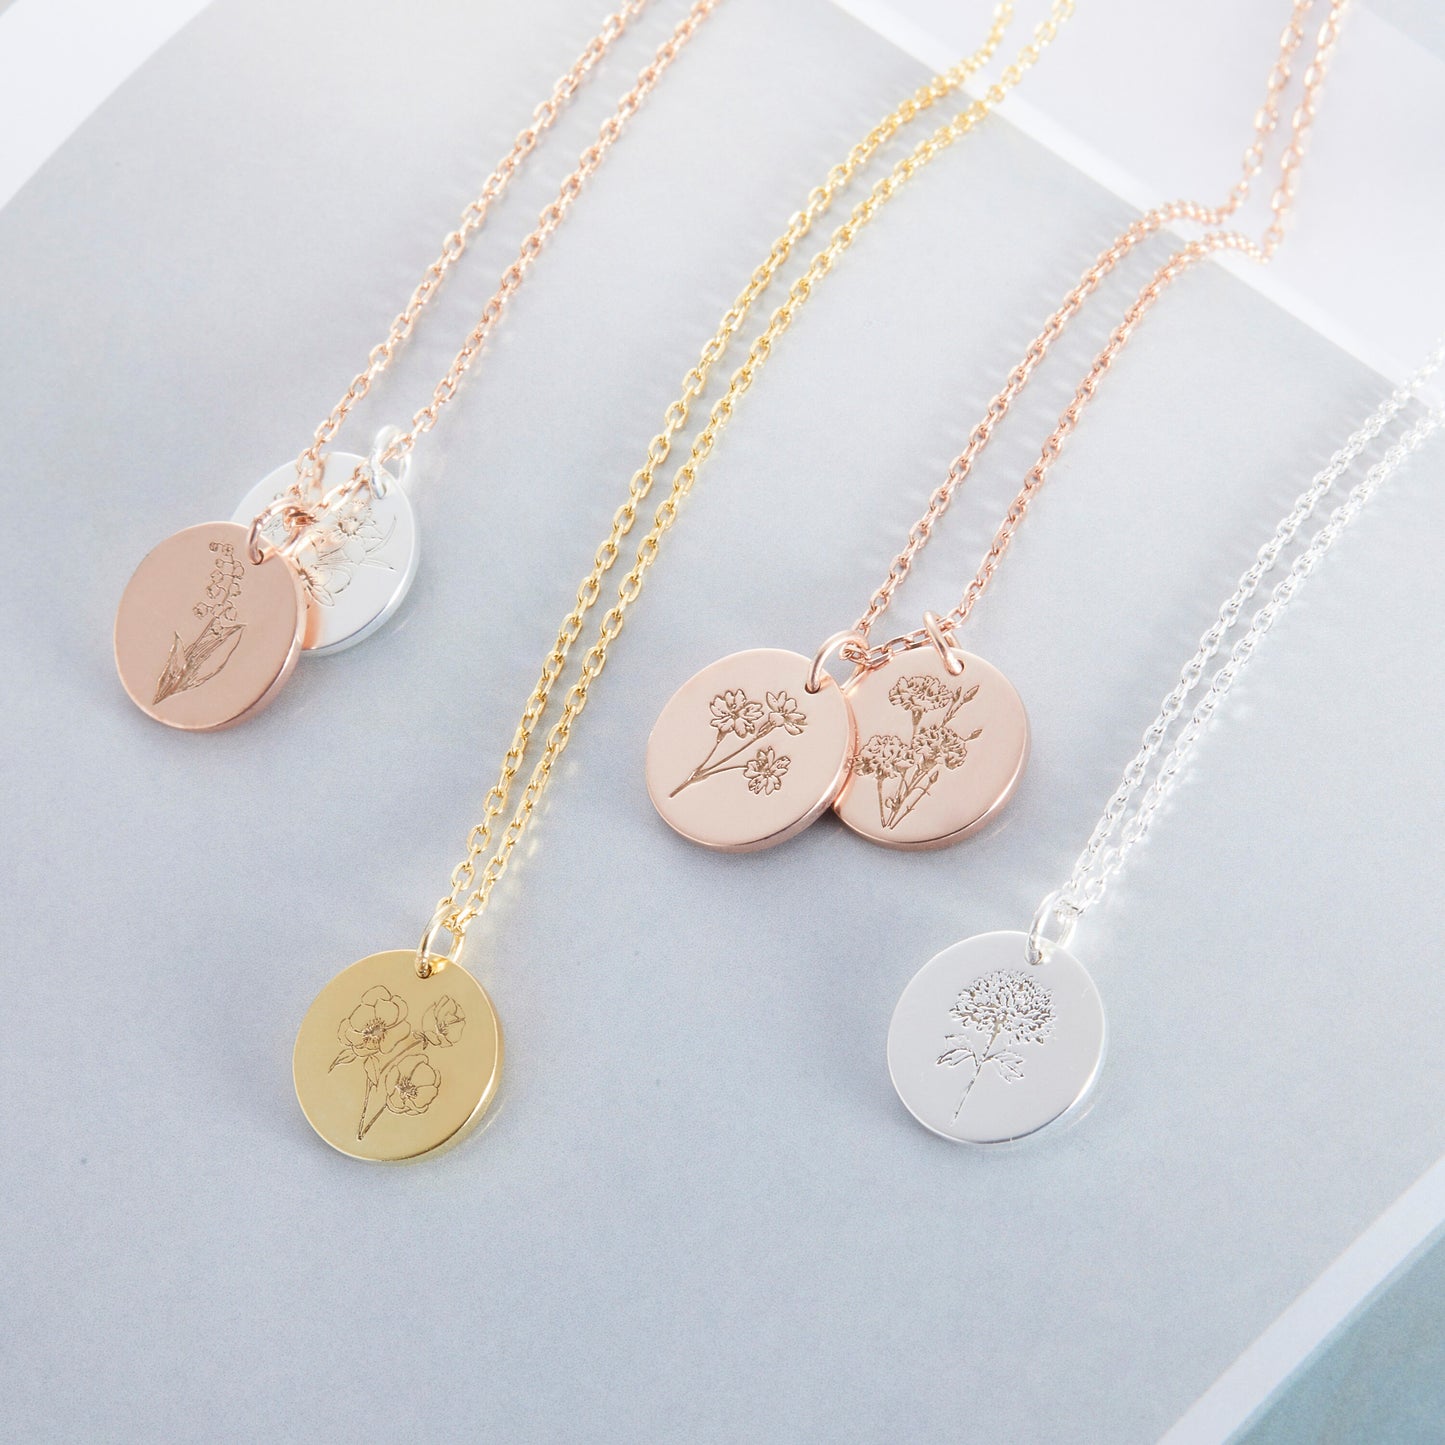 Personalized Mother's Day Gift | Birth Flower Necklace | Mother Daughter Necklace | Gold Plated Necklace | Delicate Custom Necklace for Mom